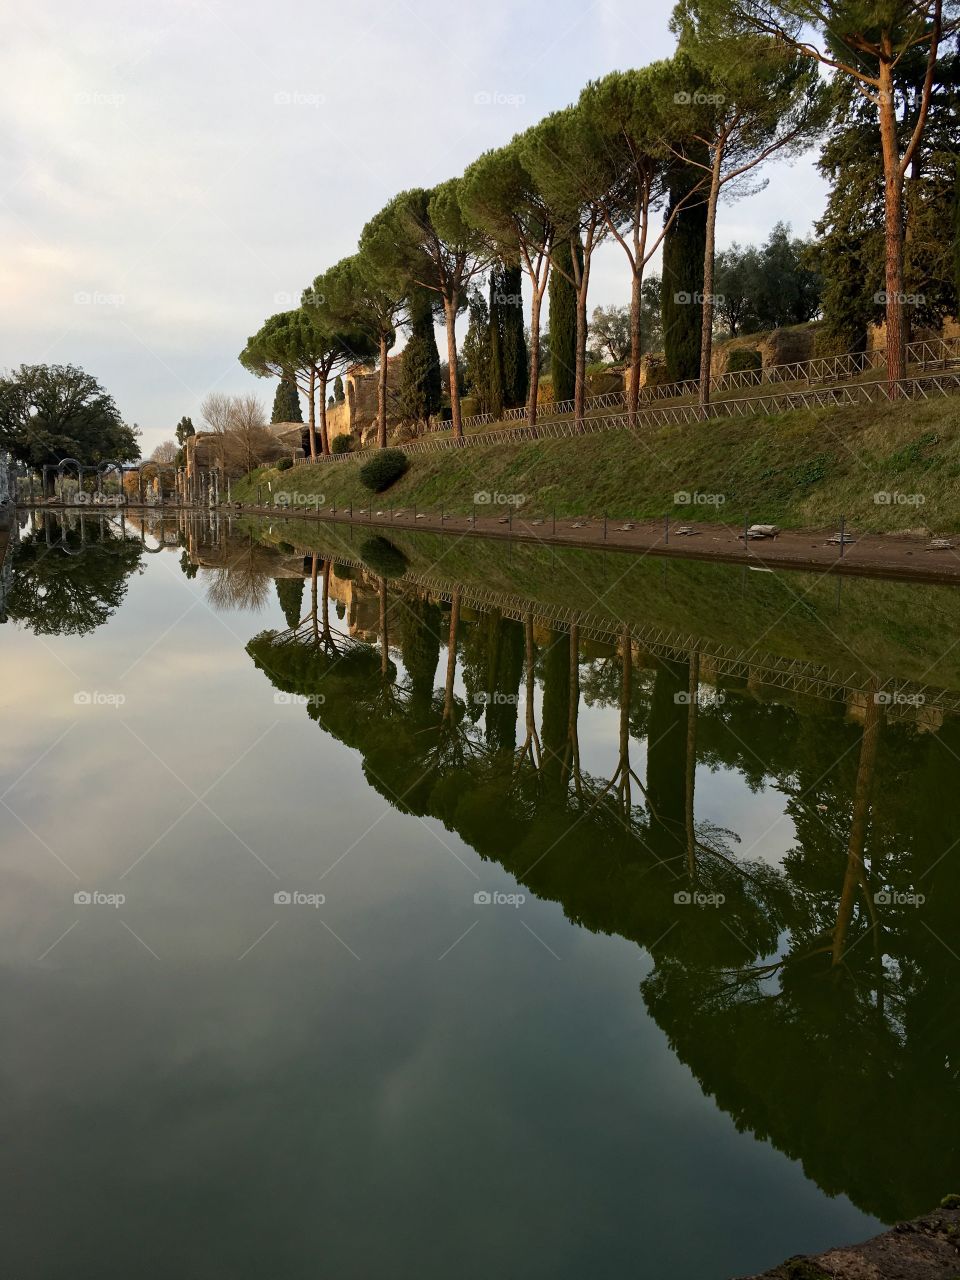 Reflection of Cyprus trees and umbrella pines at Hadrian's Villa, in the Italian countryside outside Rome 